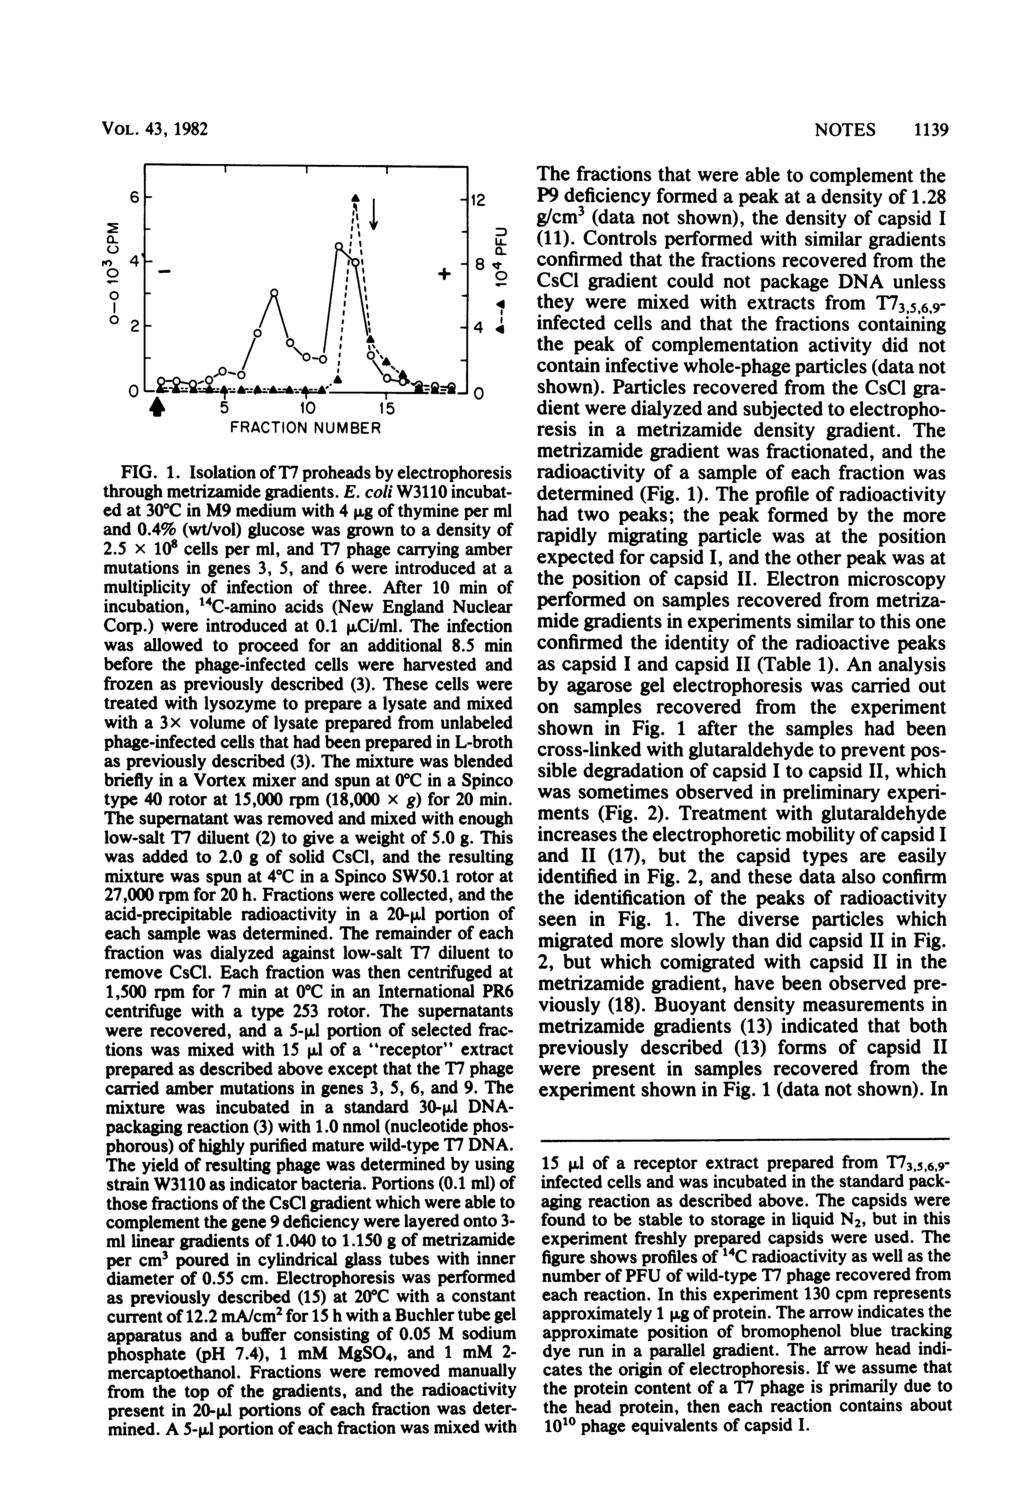 VOL. 43, 1982 a. rog 4 m- g +~~~~~'l 2 4~ 2.5xclse5 1 15 FRACTION NUMBER FIG. 1. Isolation of T7proheads by electrophoresis through metrizamide gradients. E.